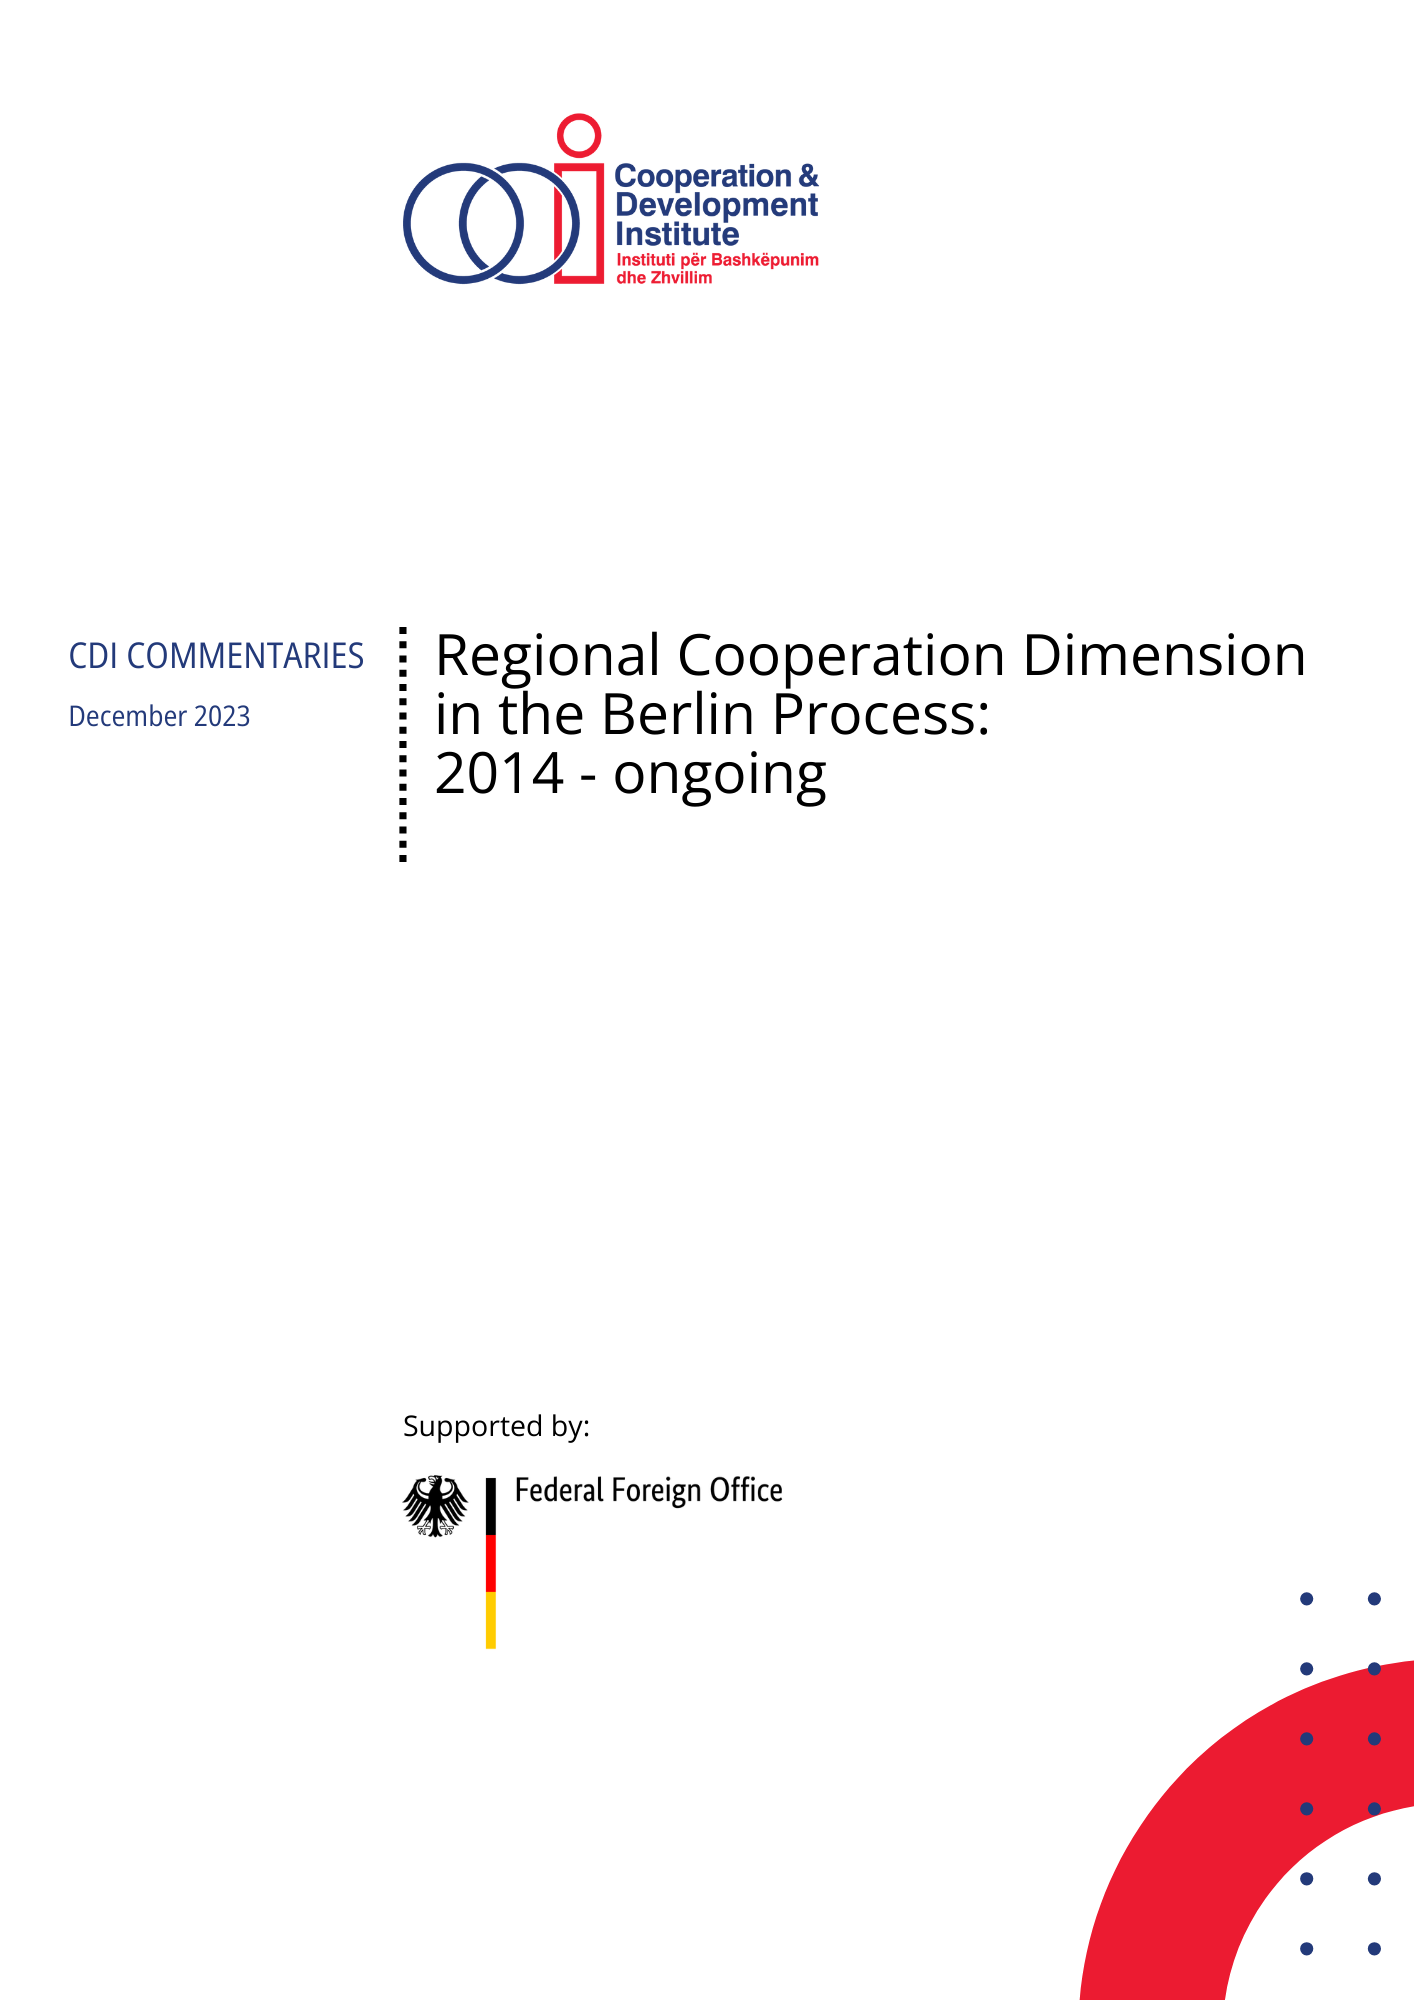 Regional Cooperation Dimension in the Berlin Process: 2014 – ongoing